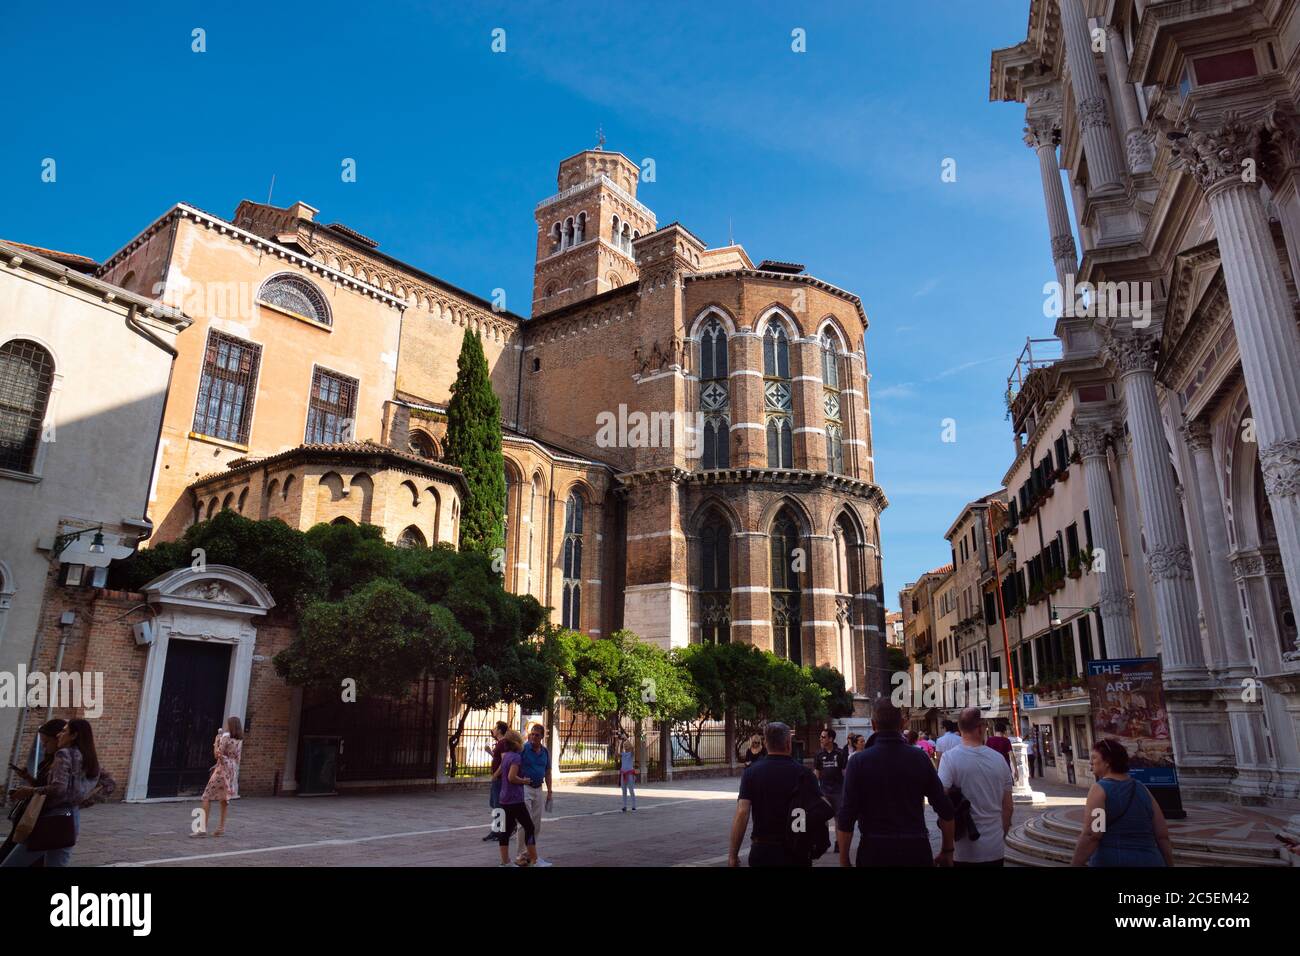 Oct. 1, 2019 - Venice, Italy: view to the Basilica of Frari. Crowded streets full of people. Grand Art Museum of Venice at right side. Stock Photo